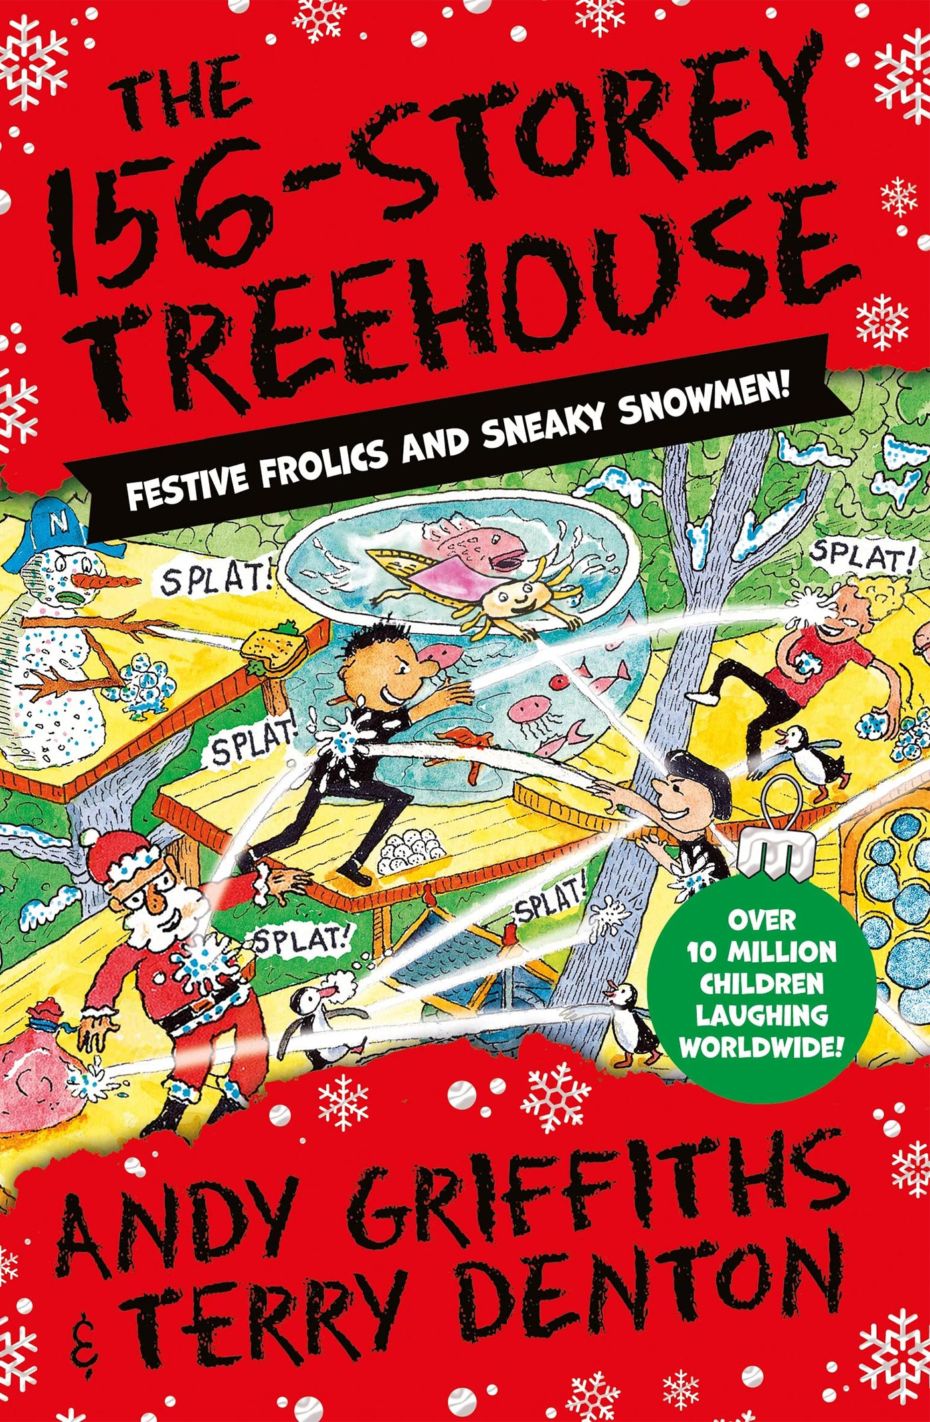 Book jacket for 156 Storey Treehouse by Andy Griffiths